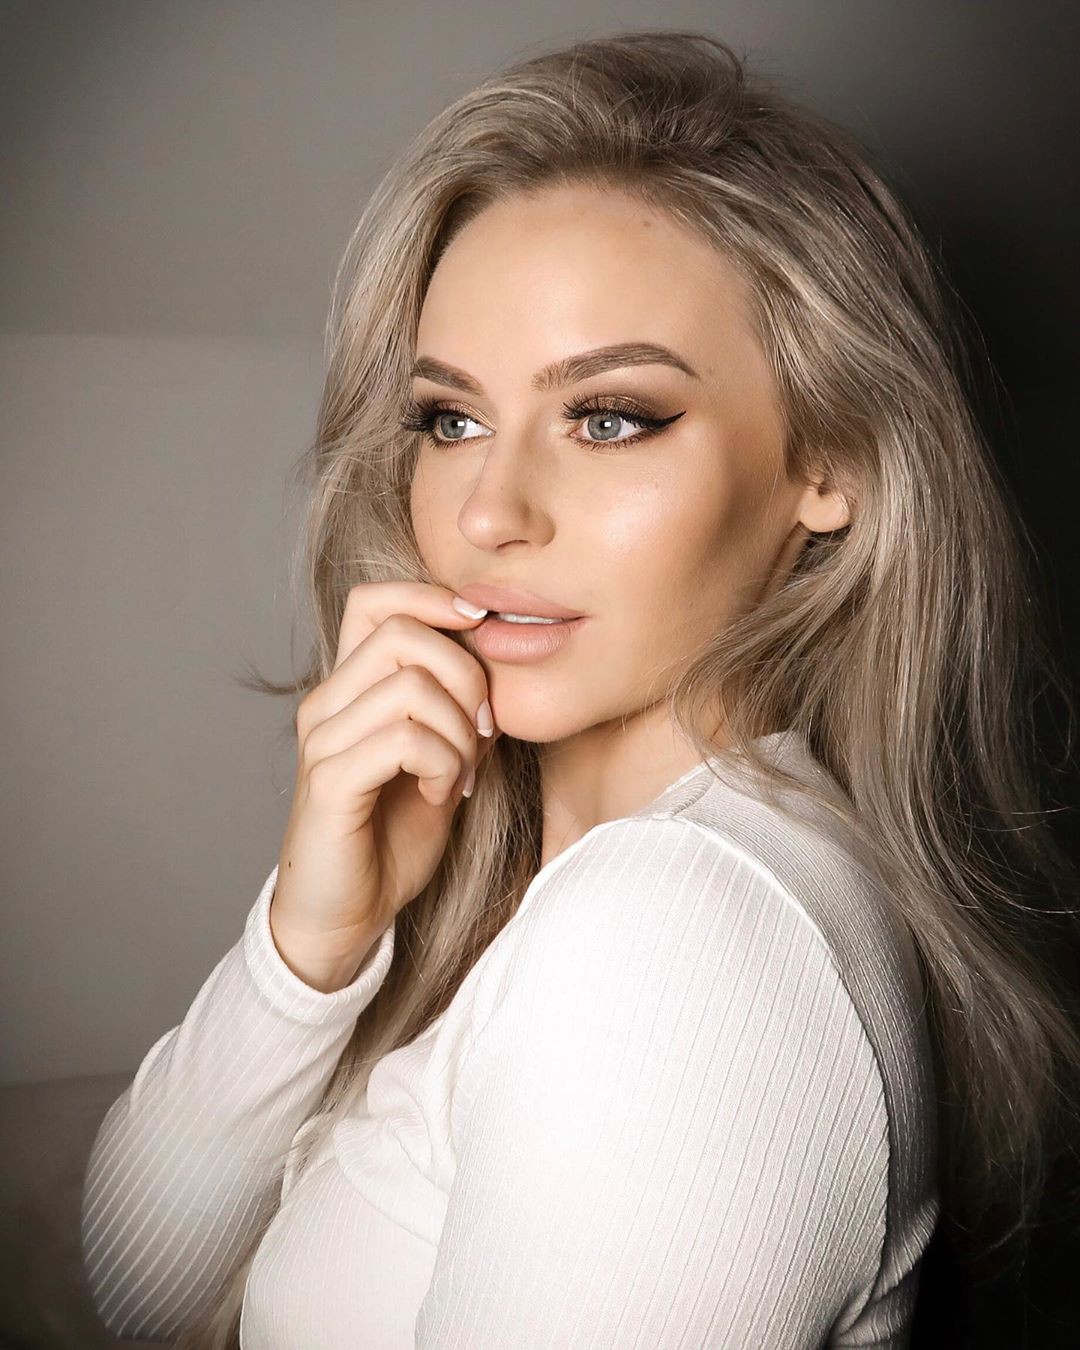 Anna Nystrom Instagram Pictures, Anna Nystrom, Like button: anna nyström  